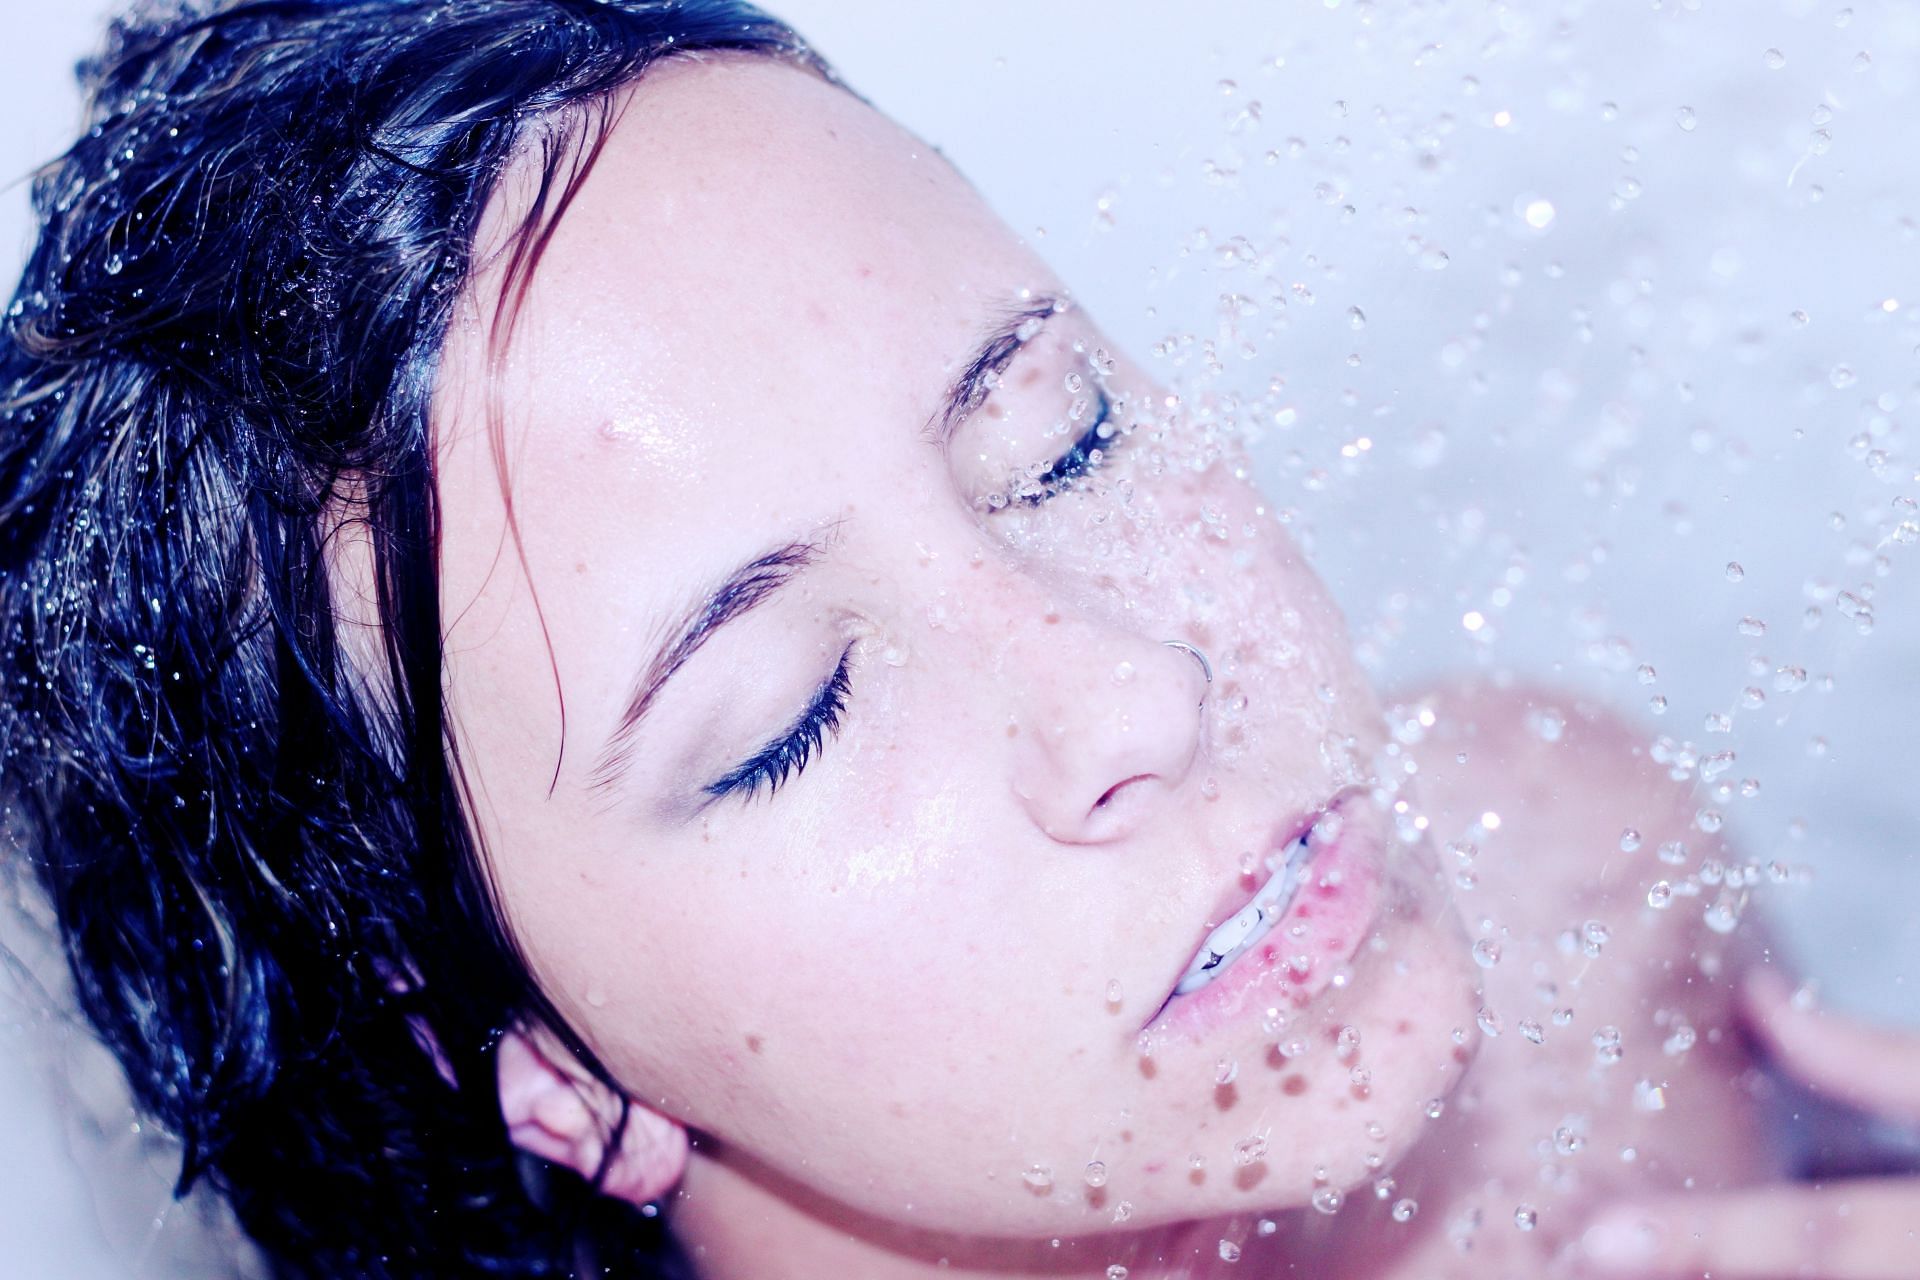 Cold water for face. (Image via Pexels/ Leah Kelley)